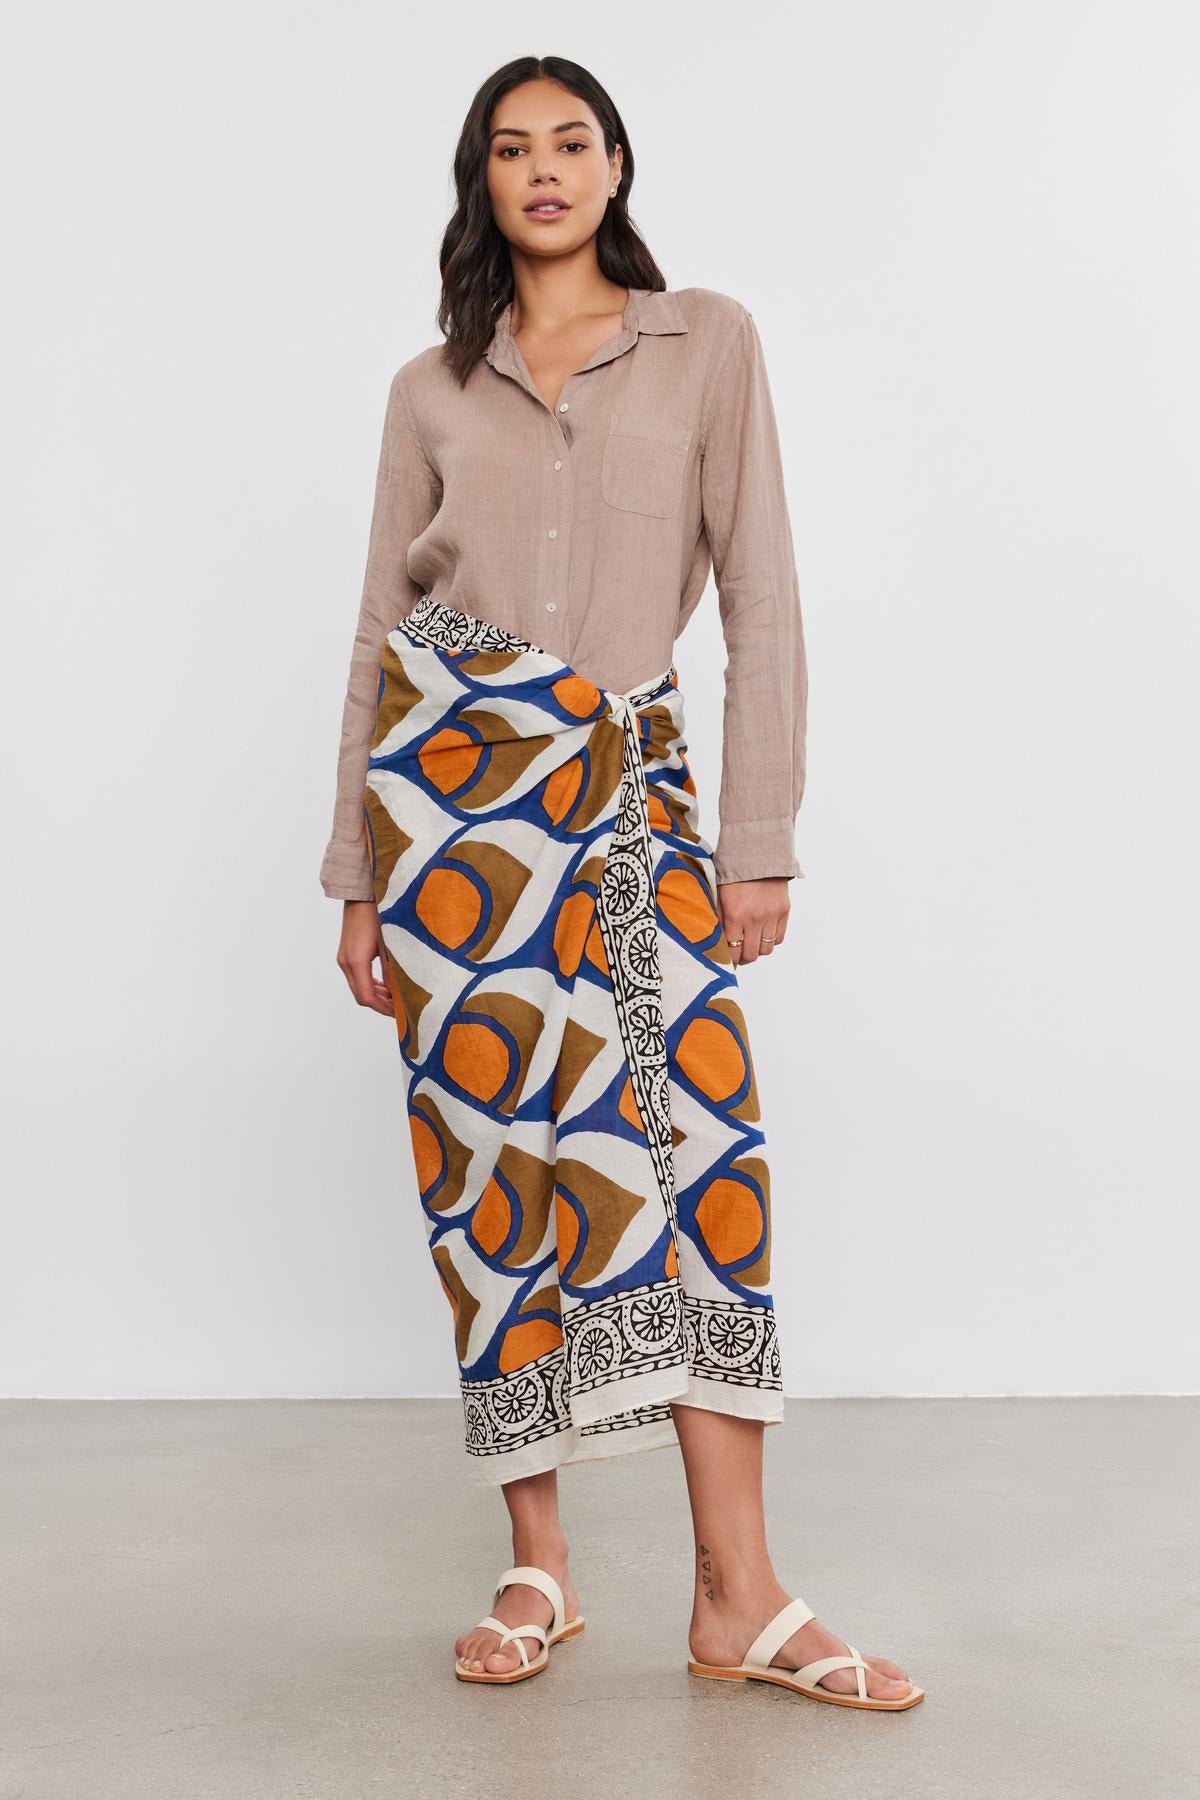 A woman in a studio poses wearing a Velvet by Graham & Spencer NATALIA LINEN BUTTON-UP SHIRT, a colorful patterned skirt, and white sandals.-36752946299073